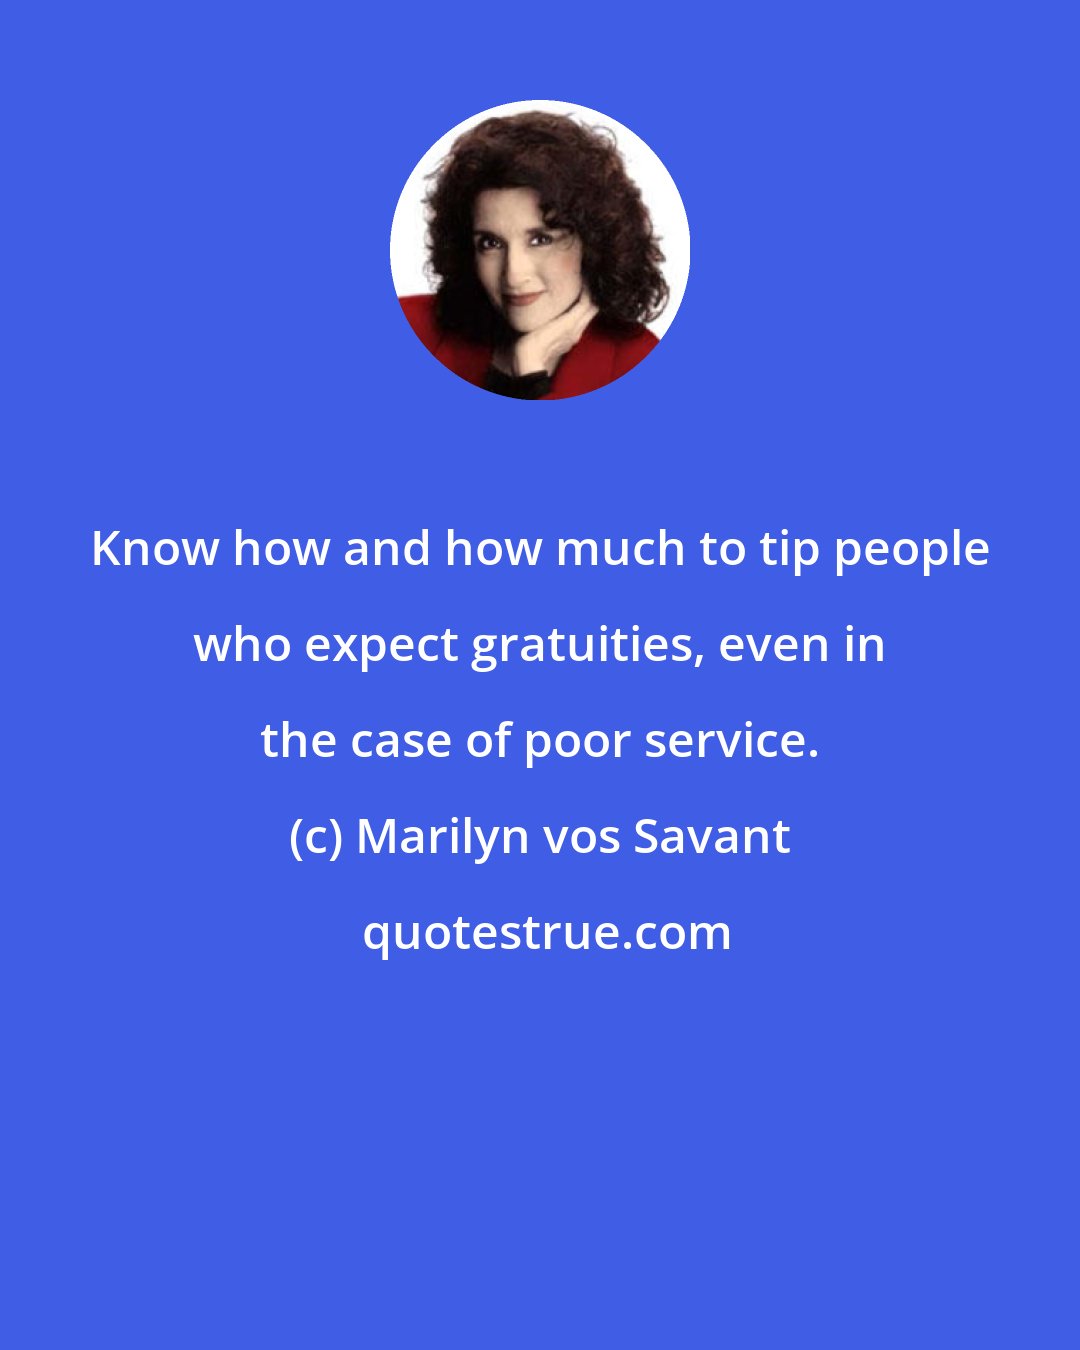 Marilyn vos Savant: Know how and how much to tip people who expect gratuities, even in the case of poor service.